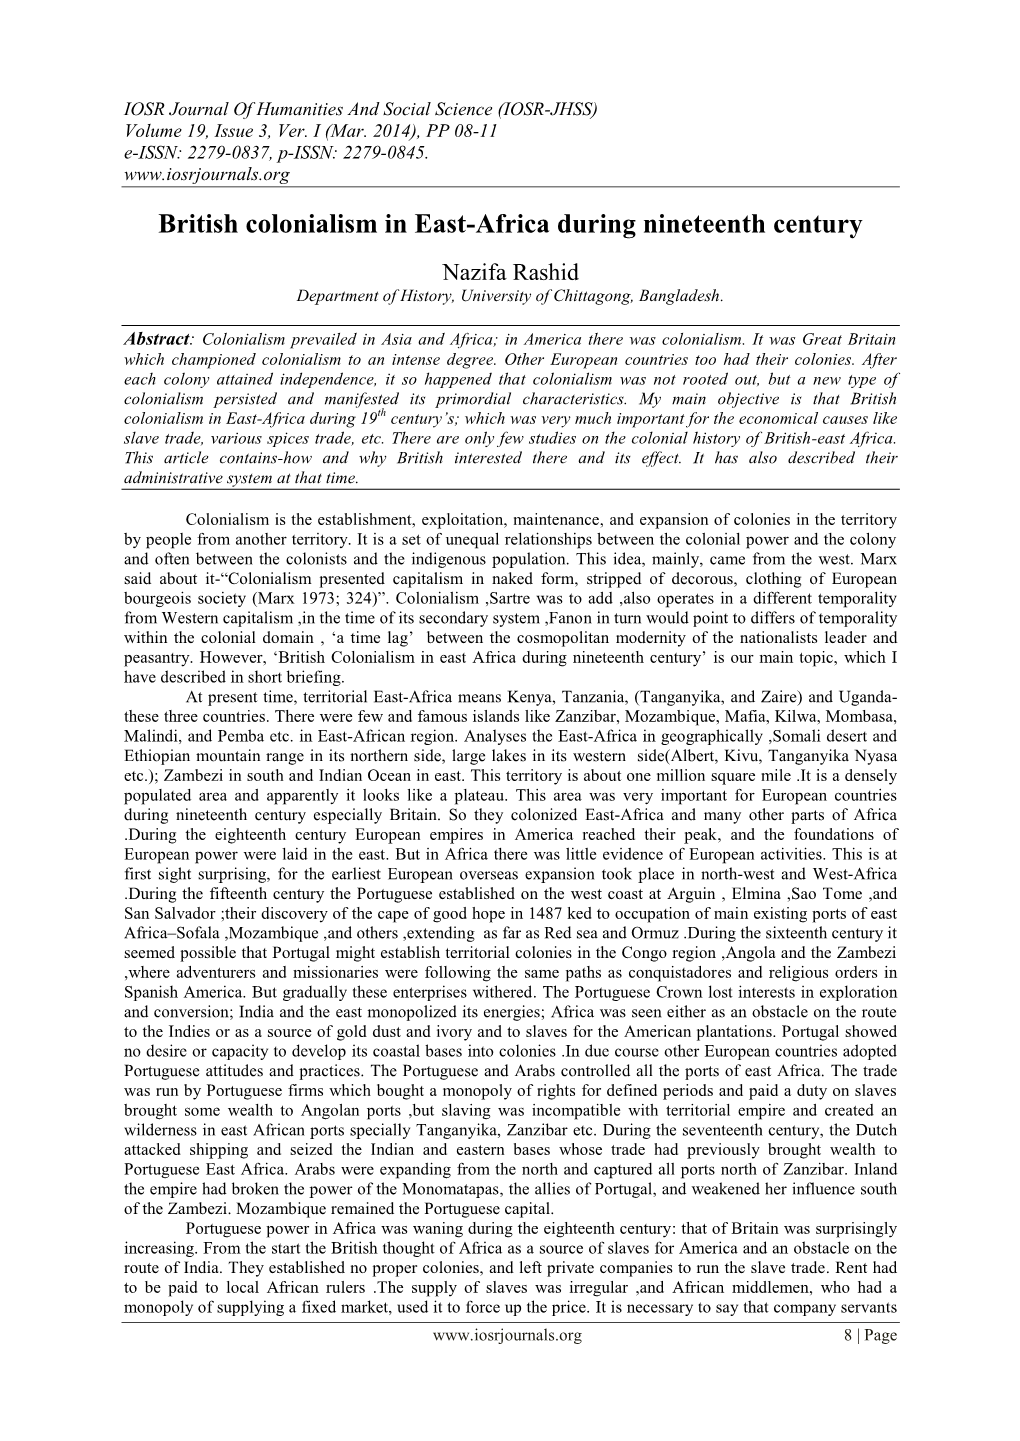 British Colonialism in East-Africa During Nineteenth Century